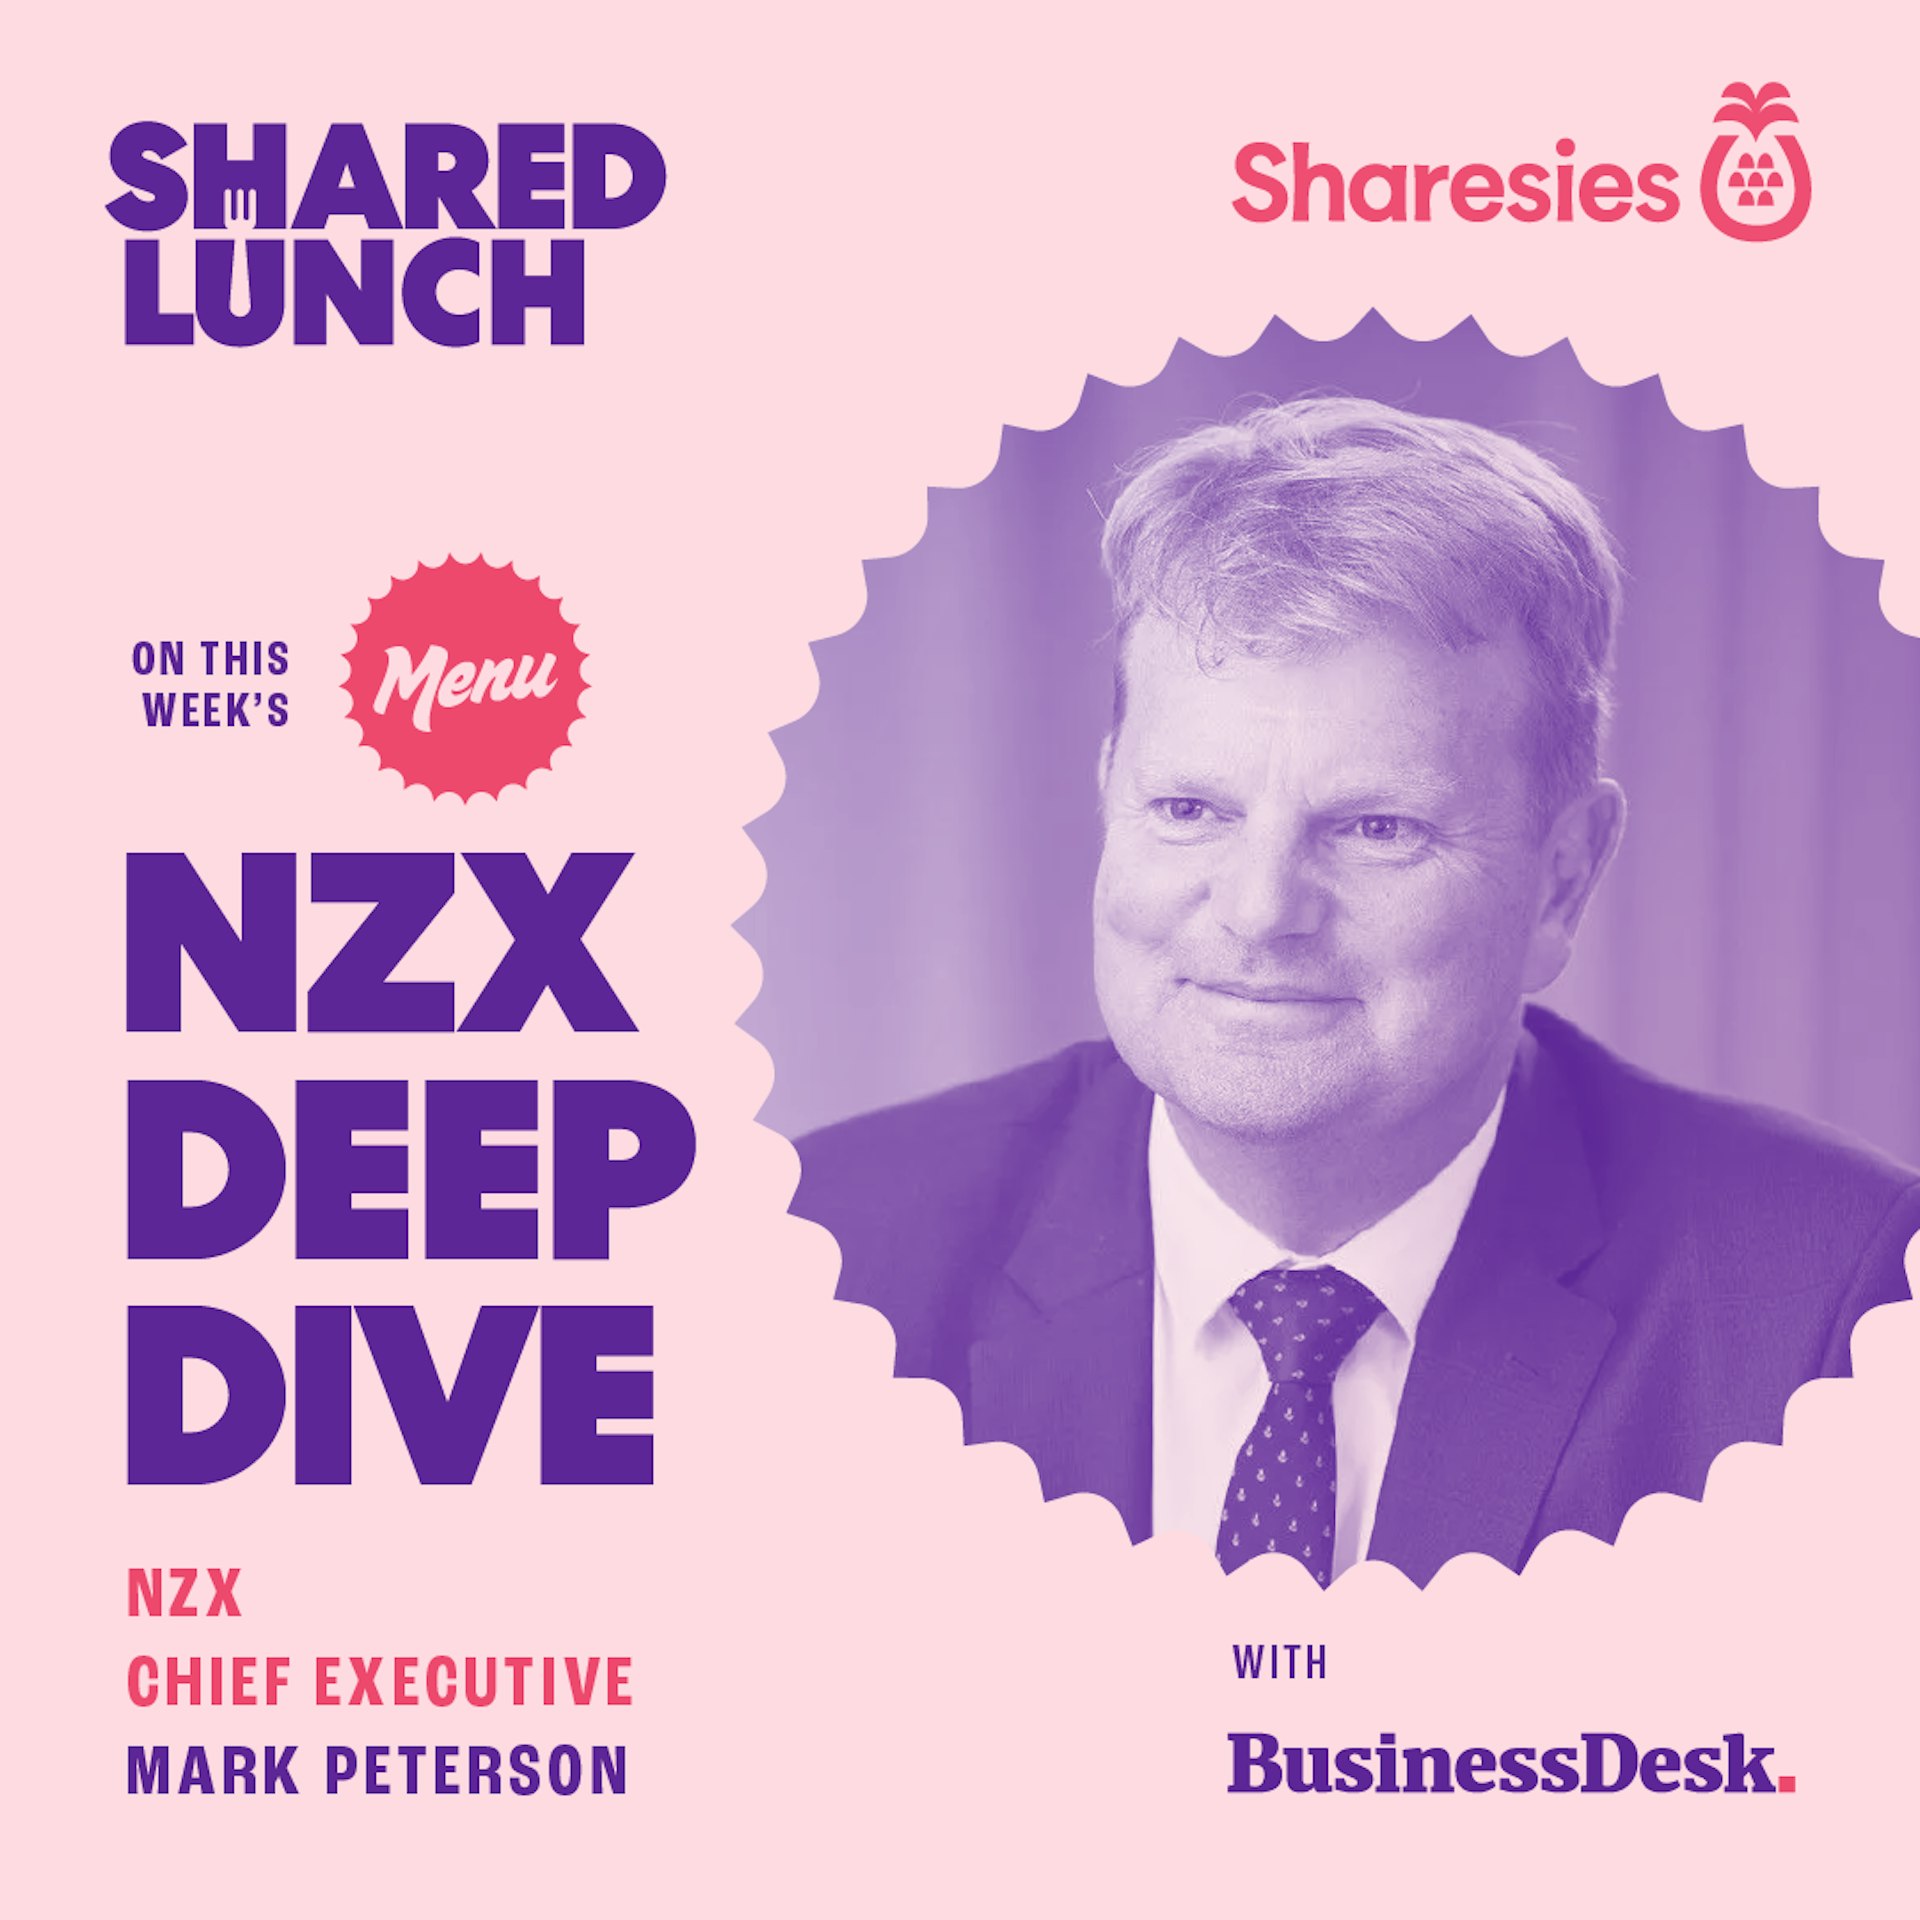 Shared Lunch the NZX Chief Executive Mark Peterson.